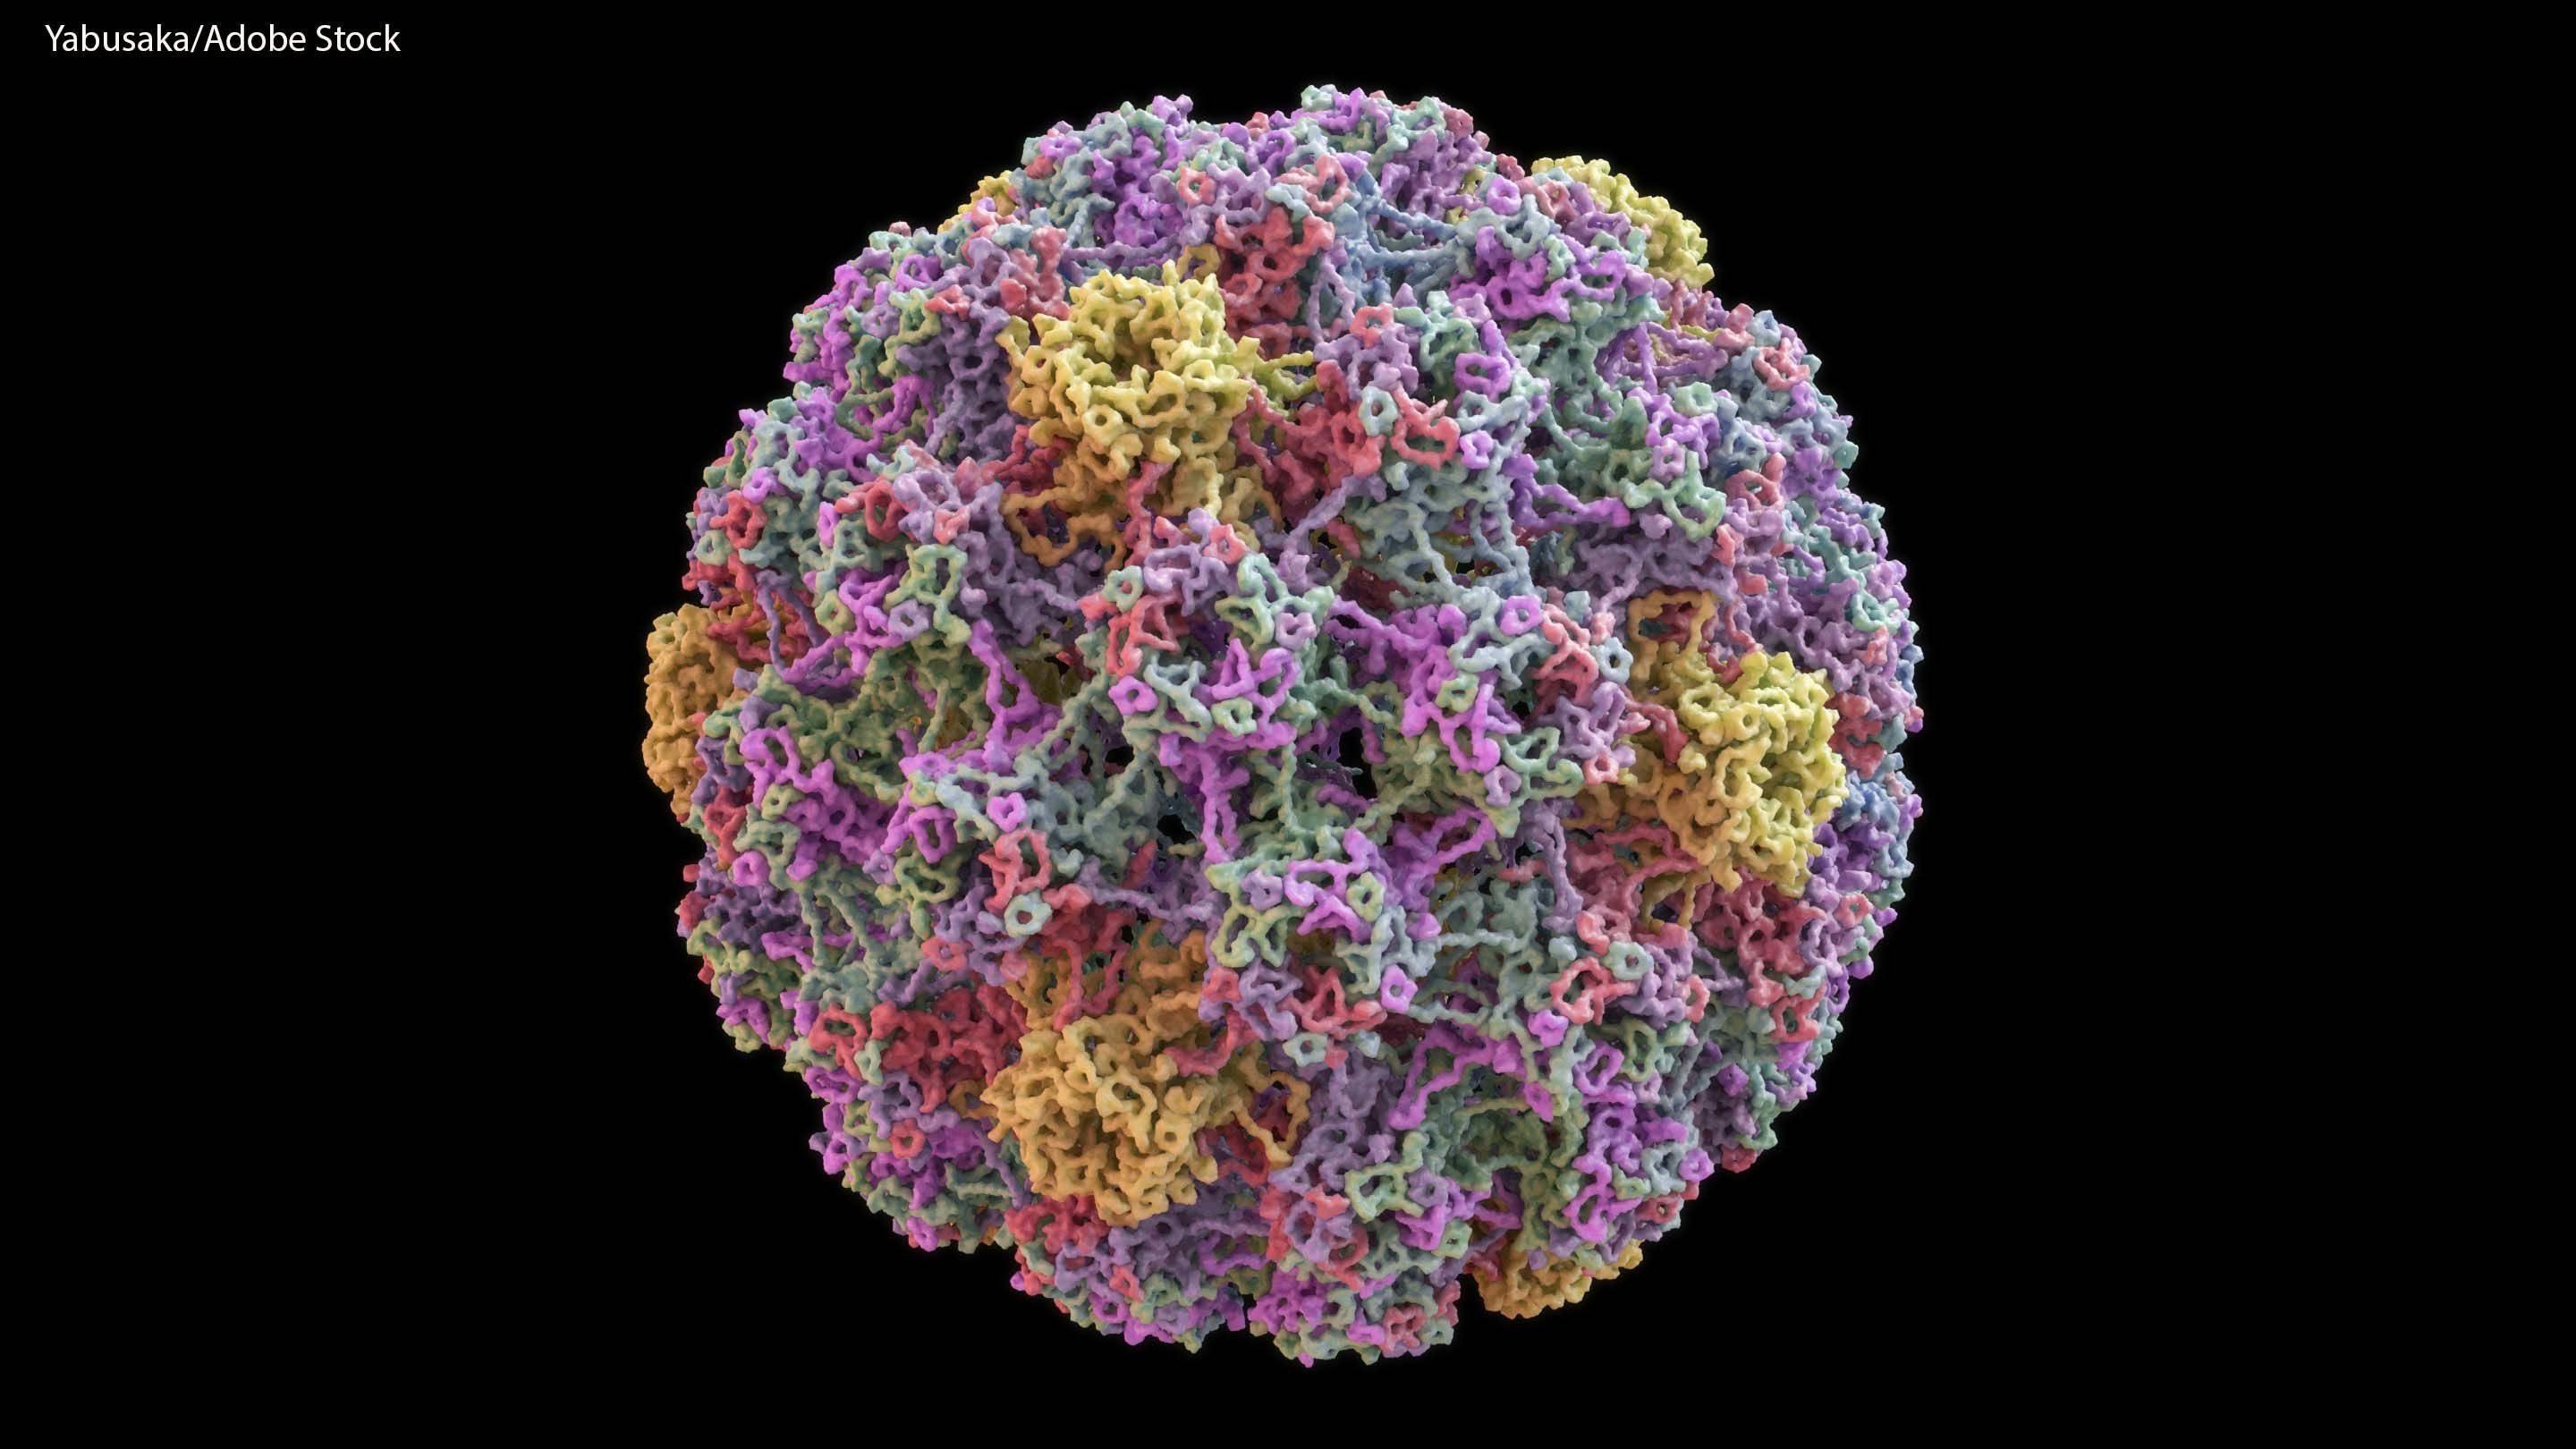 High Rates of Oropharynx Cancer Tied to HPV